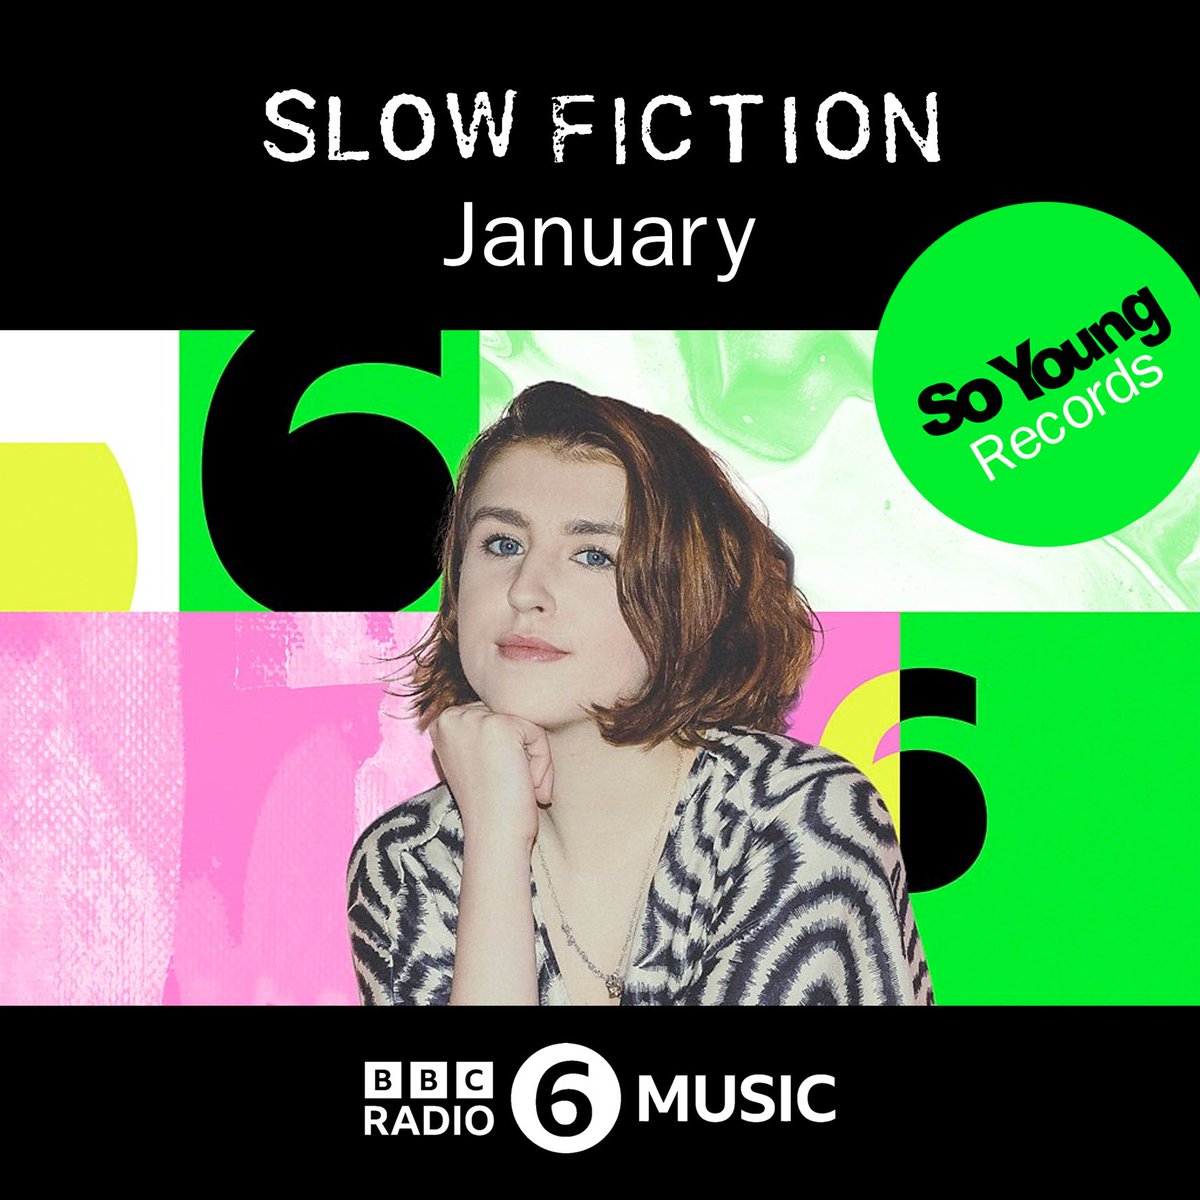 'I think with every single release I become more obsessed with them' A big thanks to @empilbeam for giving 'January' by @slowfictionband a spin on @BBC6Music this morning and for all the kind words! Listen back: bbc.co.uk/sounds/play/m0…